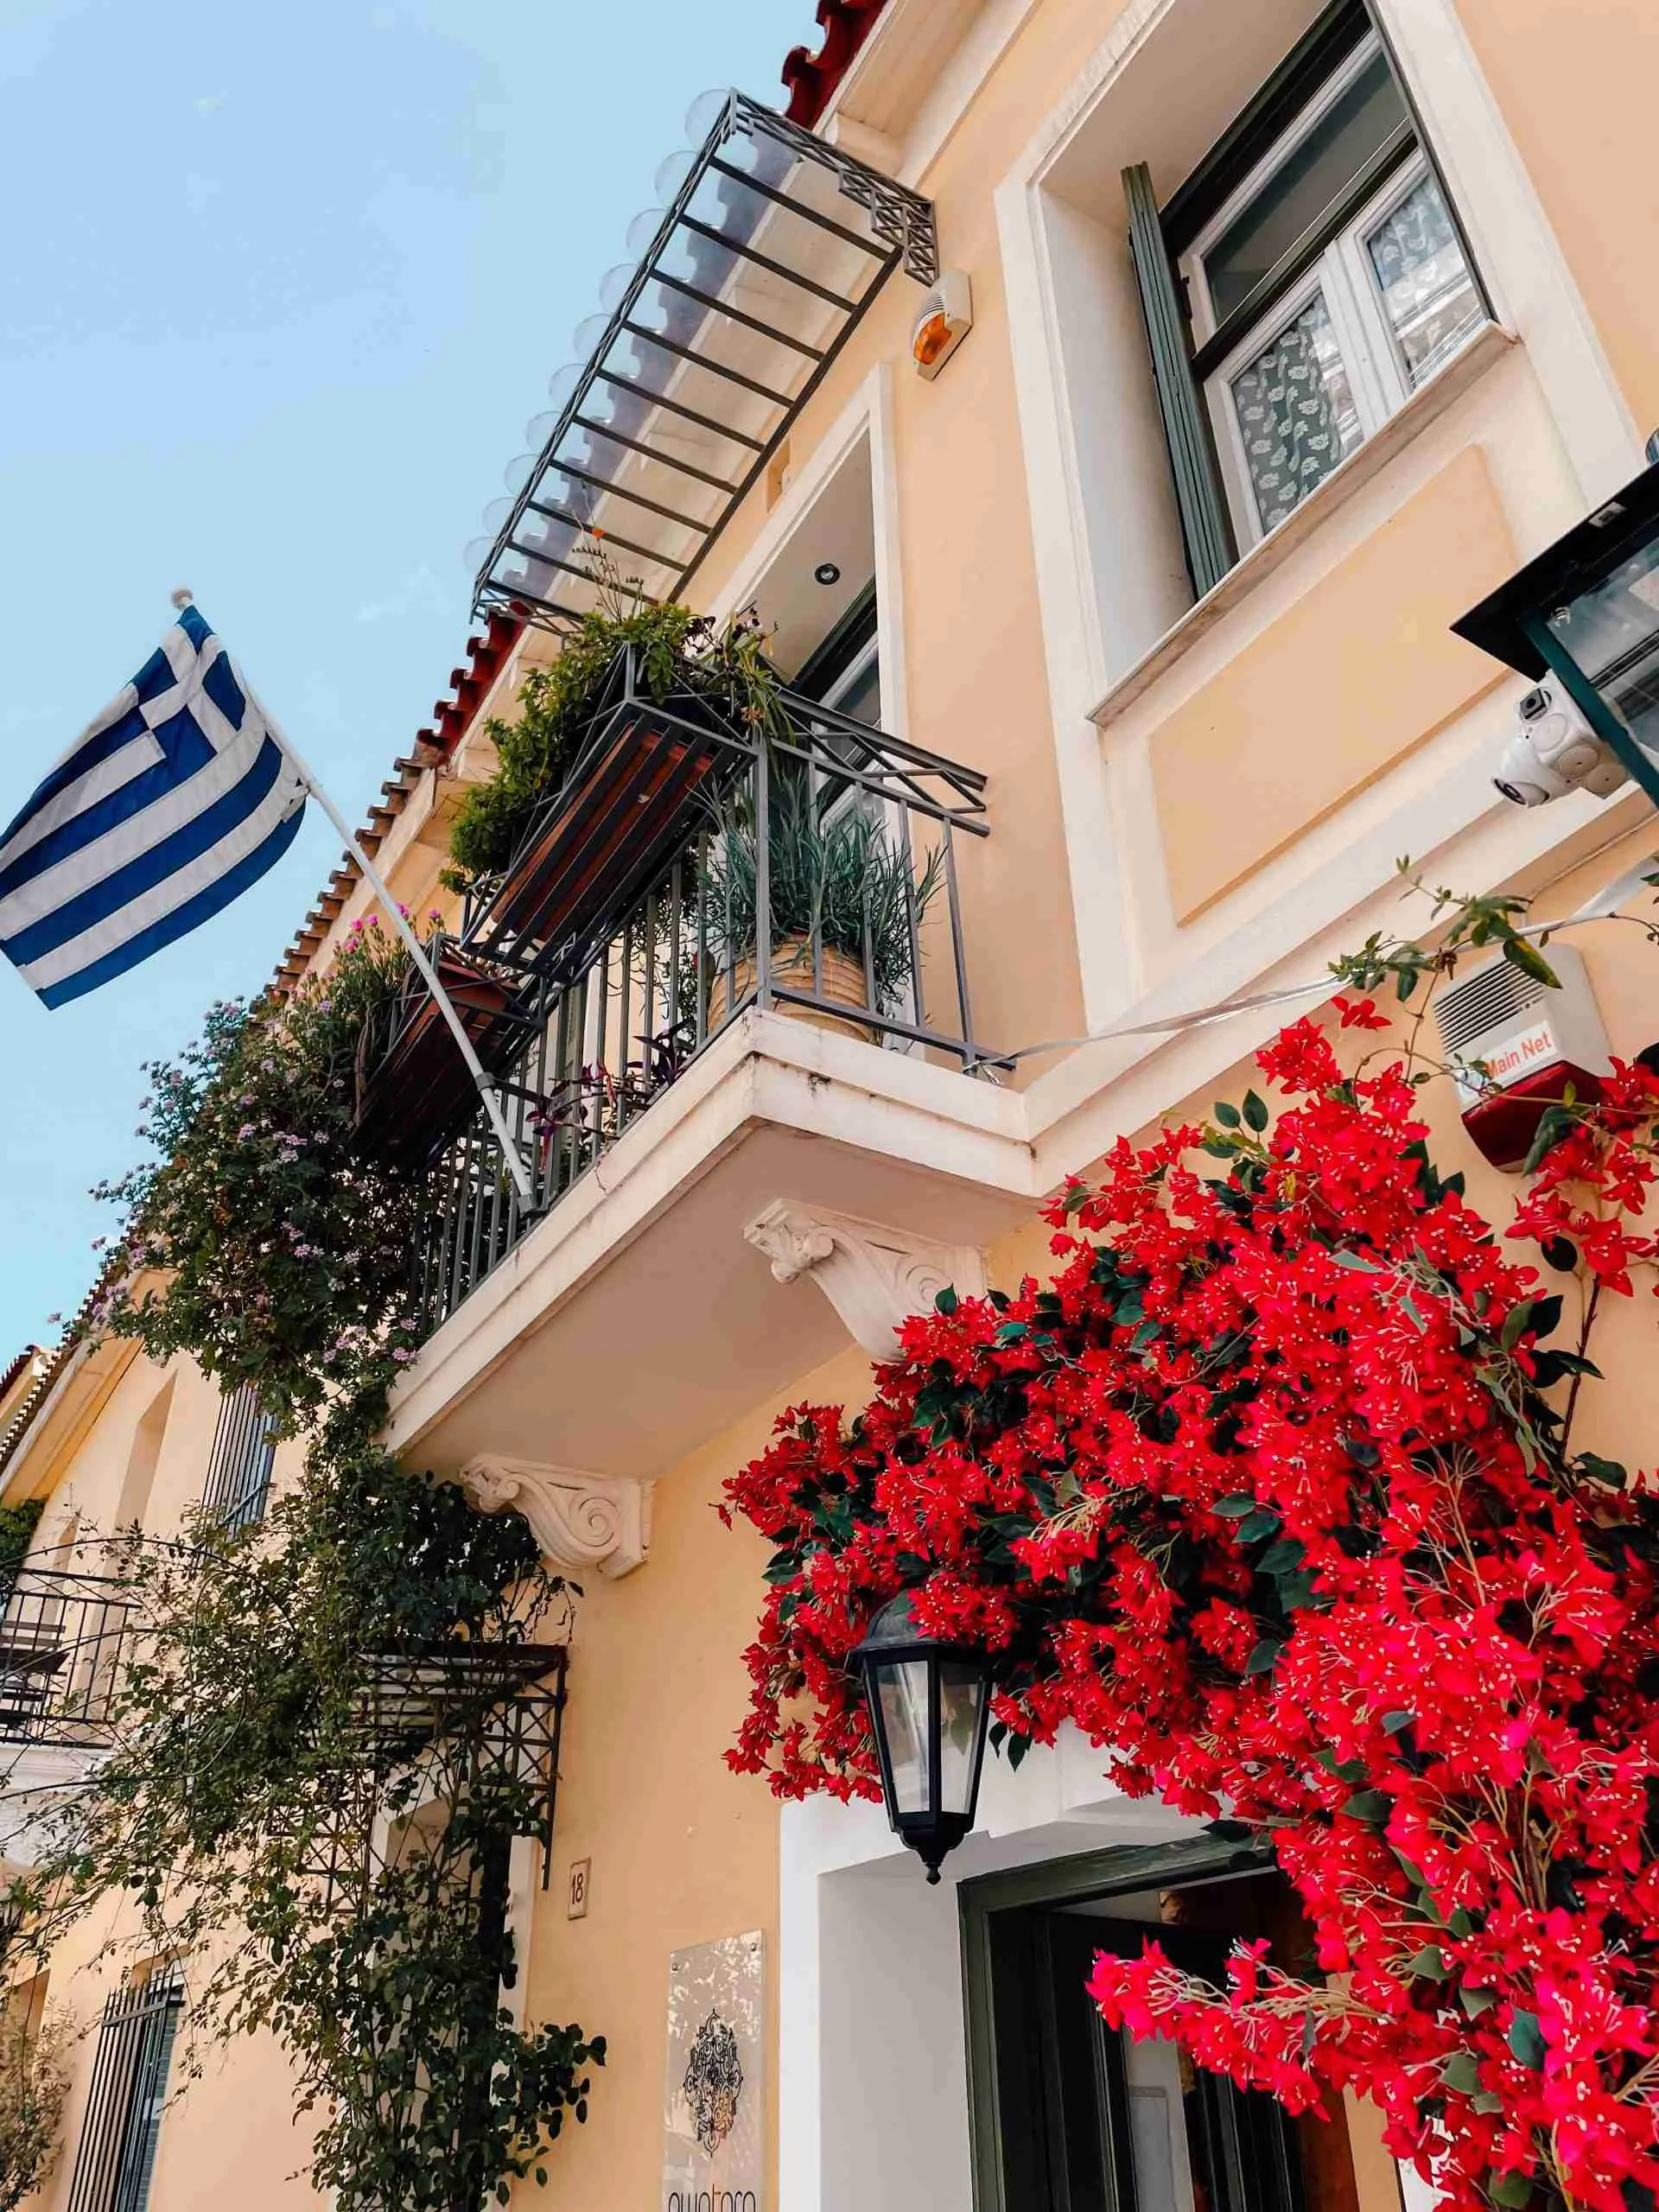 The colourful streets to wander around when visiting Athens. 
A greek flag blows in the wind off of an apartment balcony. Below is a bushel of flowers surrounding the door to the building. 